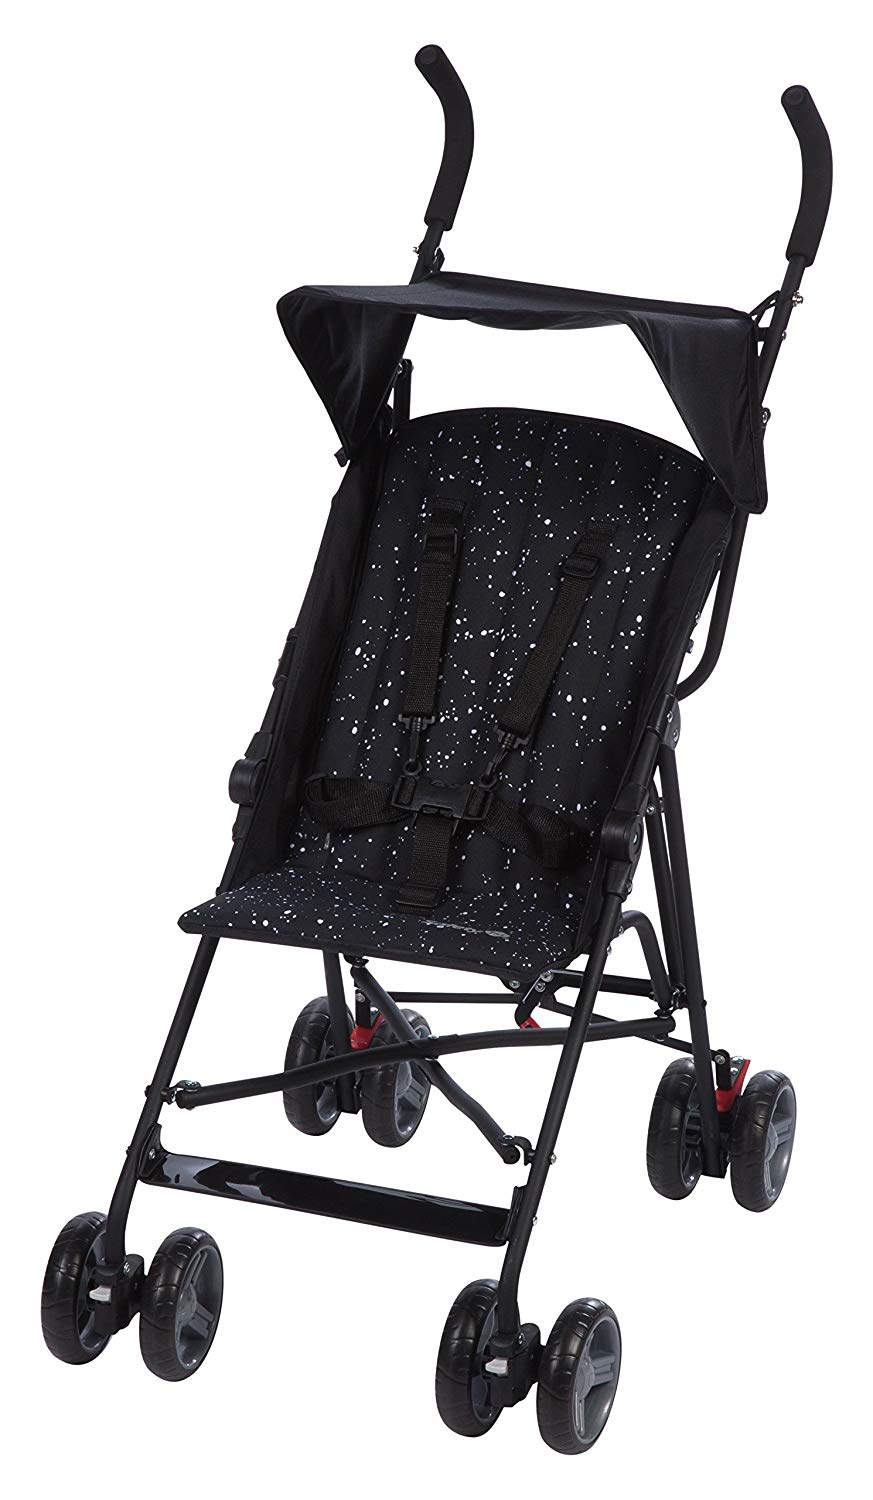 Safety 1st Flap, lightweight buggy with relaxation position and extra padding (from 6 months to 15 kg), black